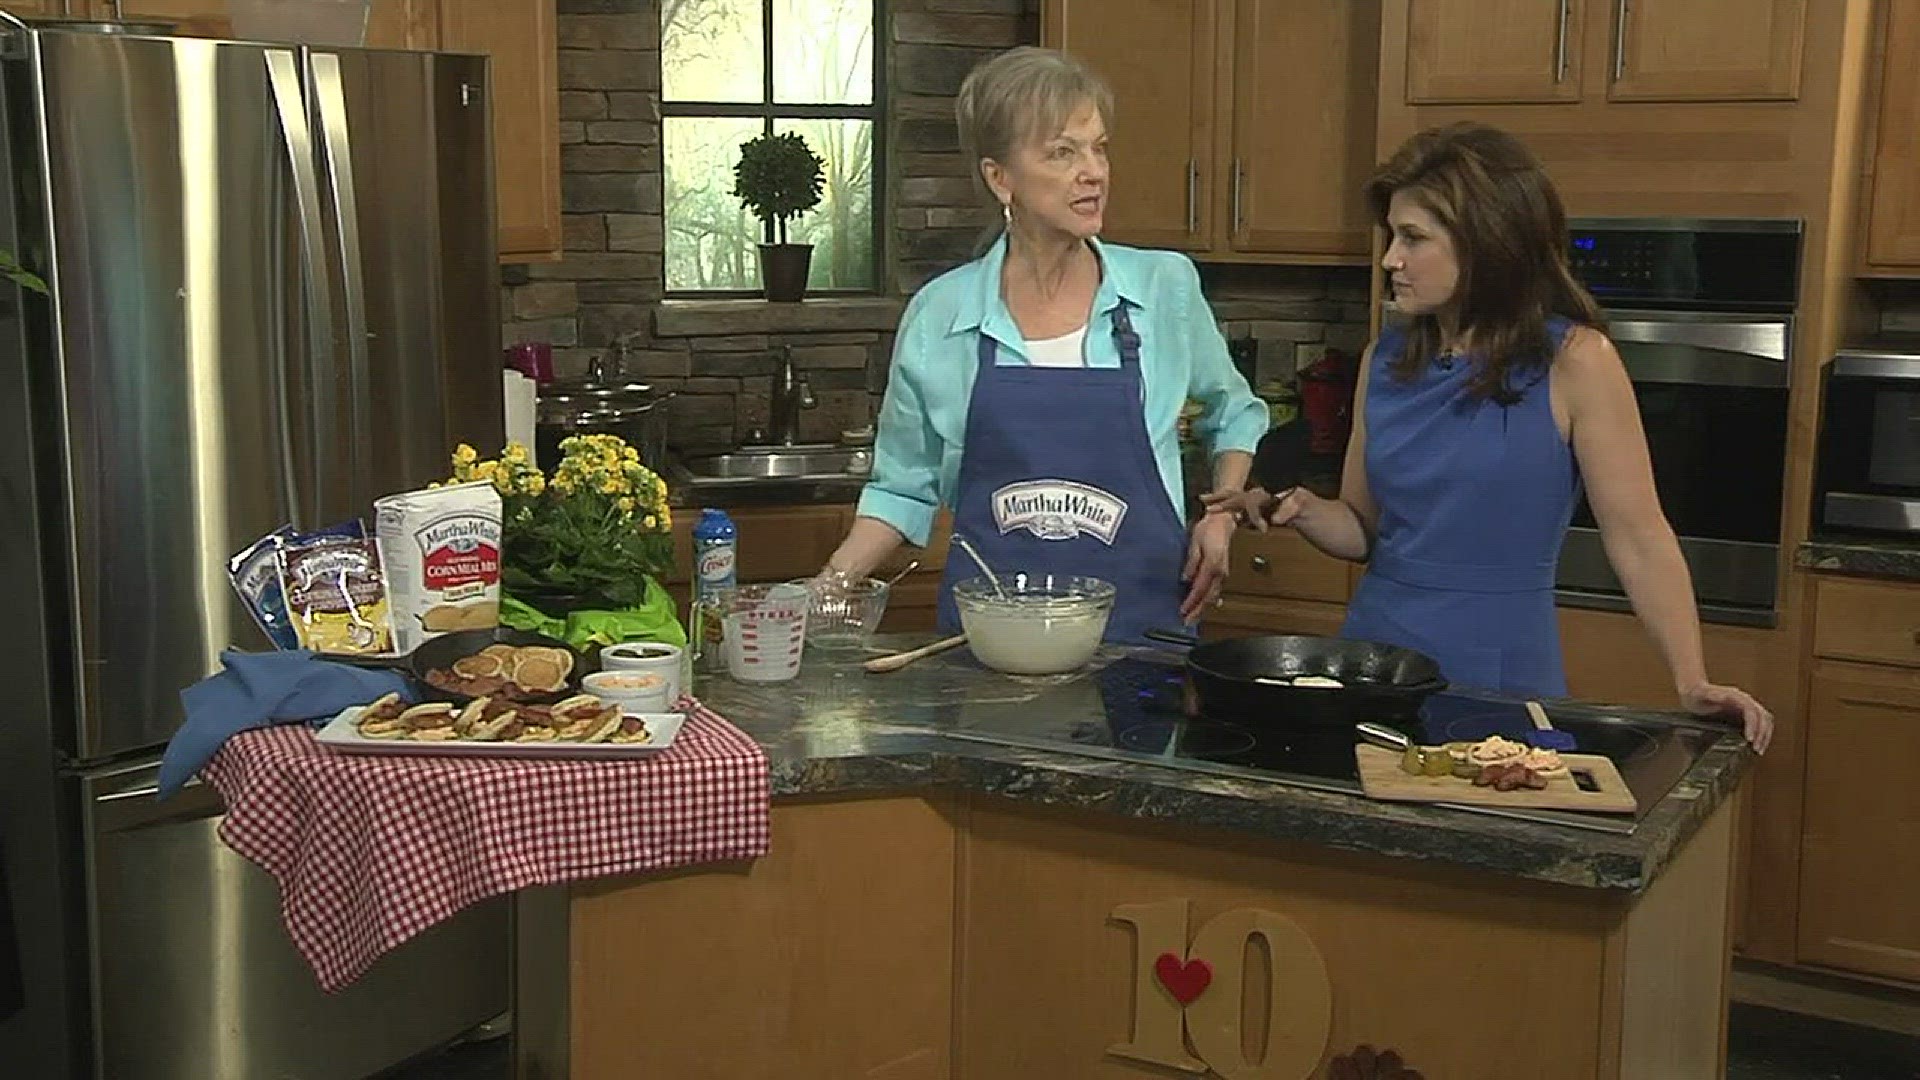 Linda Carman with Martha White joins Beth to give us a taste of her winning cornbread recipe ahead of this weekend's Cornbread Fest in south Pittsburgh, Tennessee.